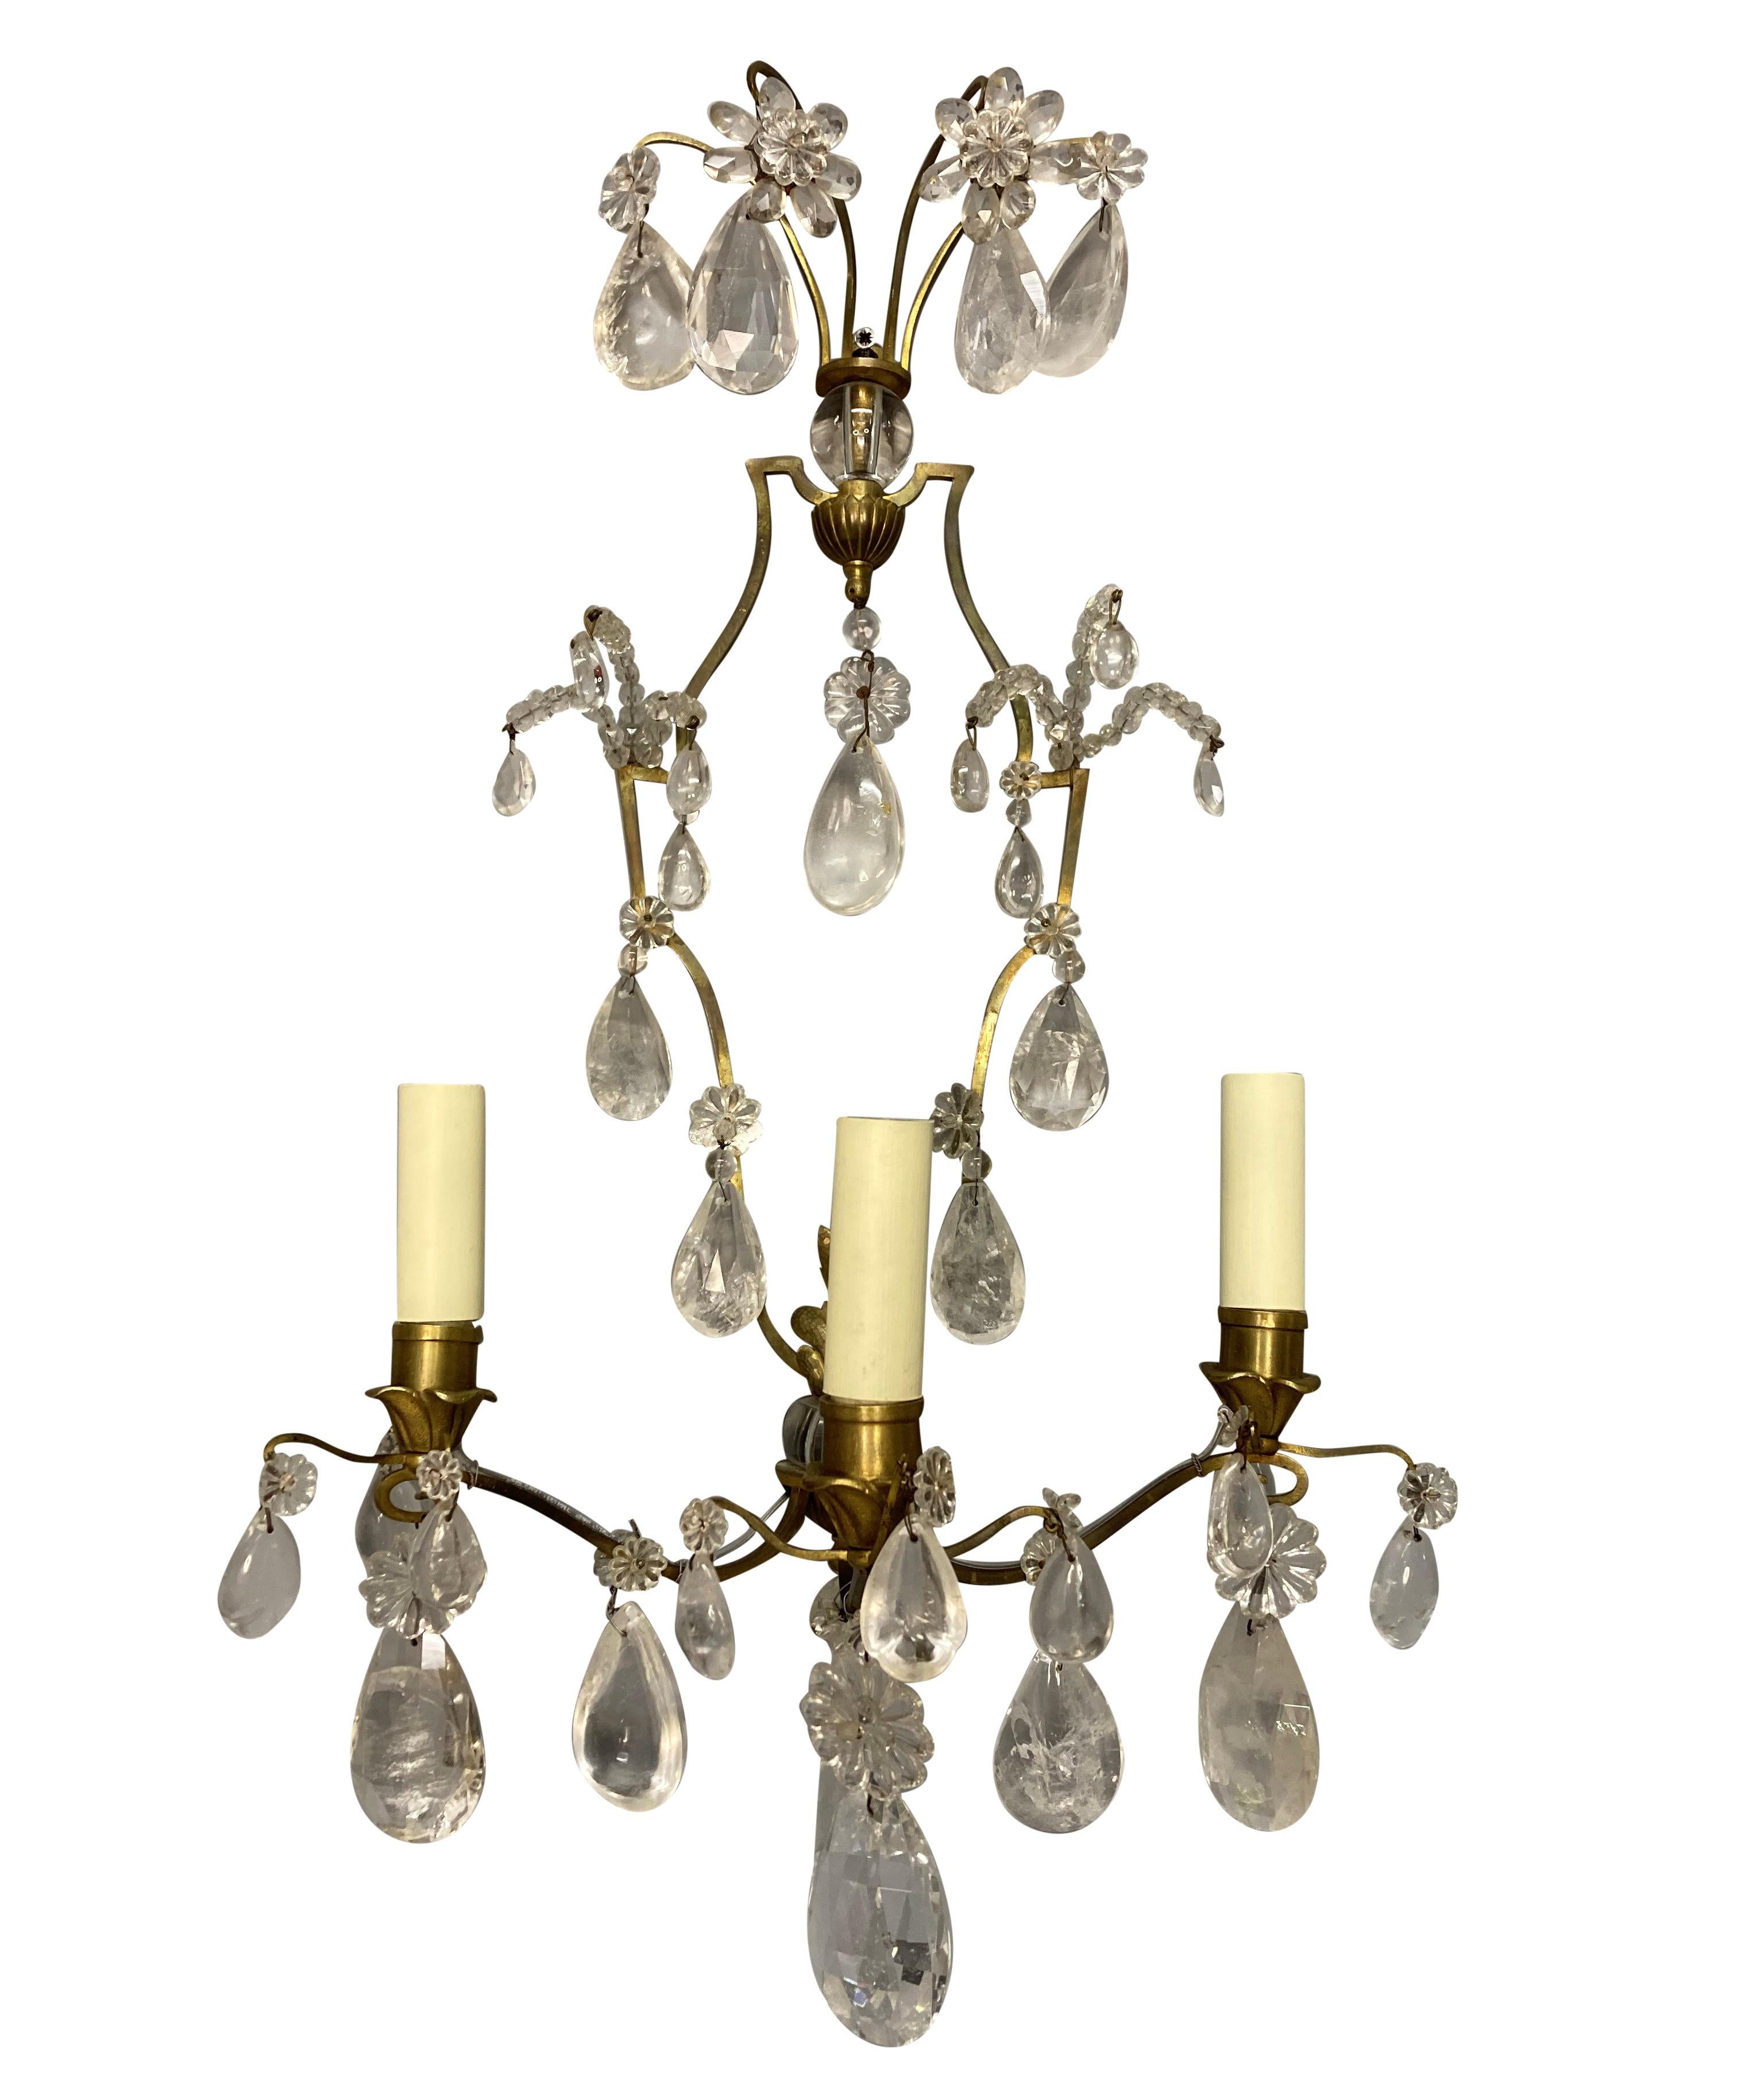 A fine pair of French, gilt brass, three branch wall lights in the Louis XIV style. Hung throughout with rock crystal pendants.